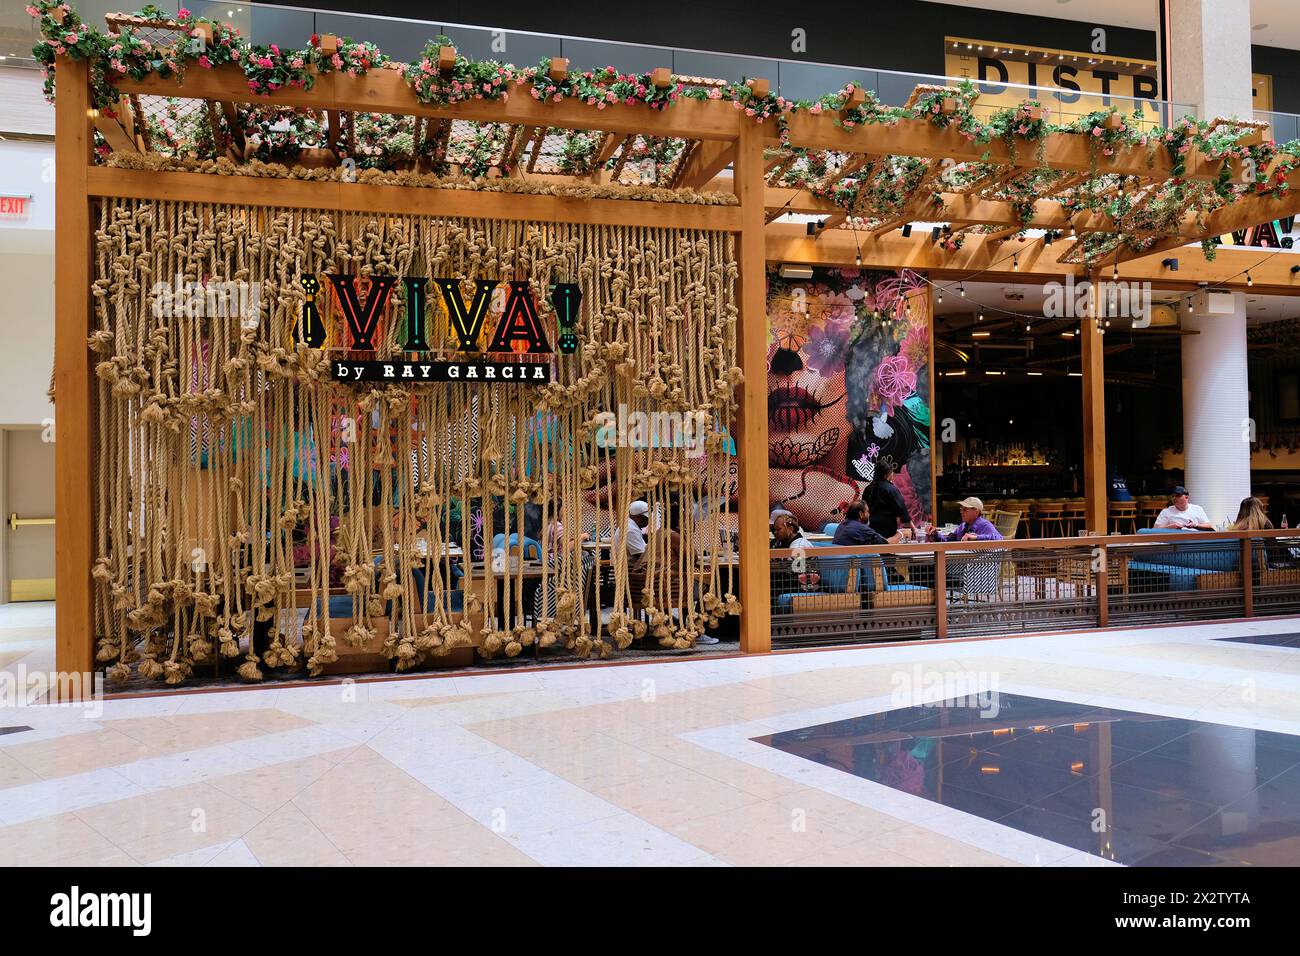 ¡Viva! by Ray Garcia, a Mexican inspired food restaurant in The District shopping area in Resorts World casino, Las Vegas, Nevada; places to eat. Stock Photo